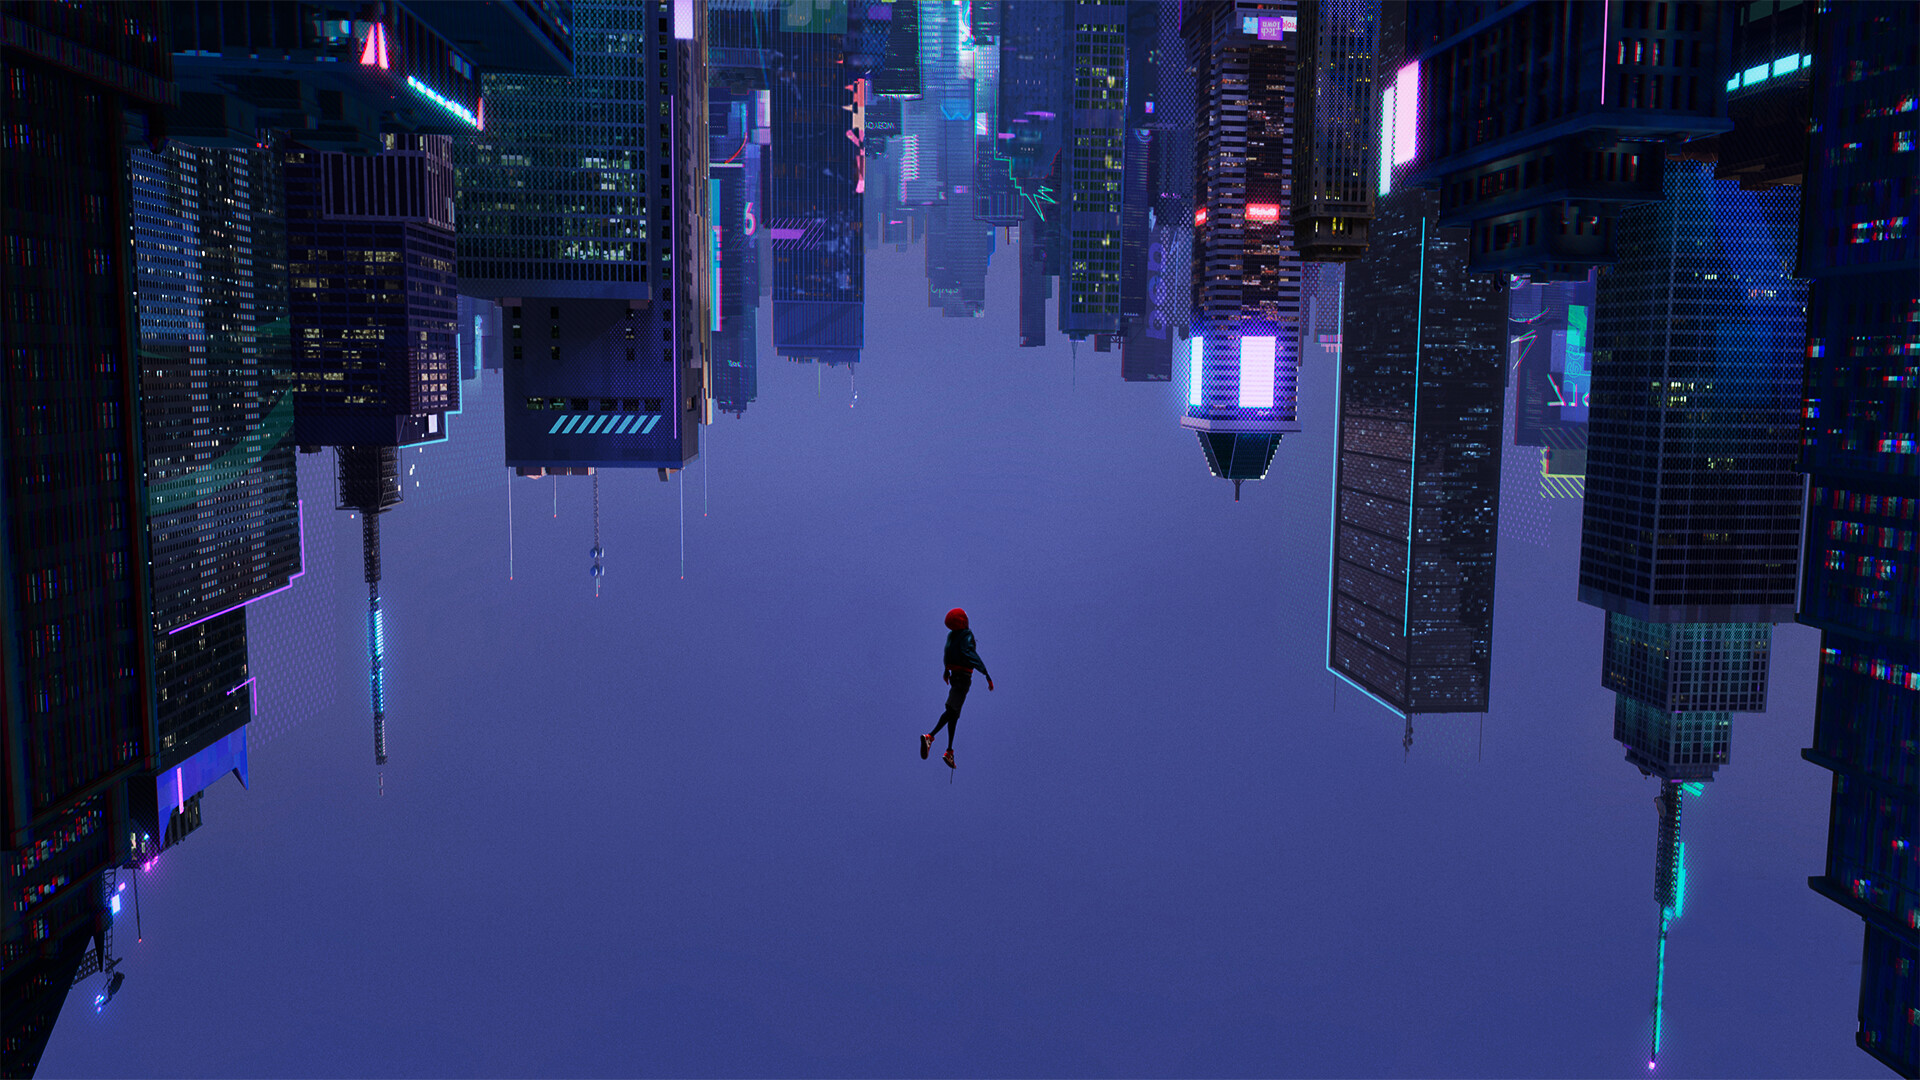 Spider-Man: Into the Spider-Verse: Produced by Columbia Pictures and Sony Pictures Animation. 1920x1080 Full HD Wallpaper.